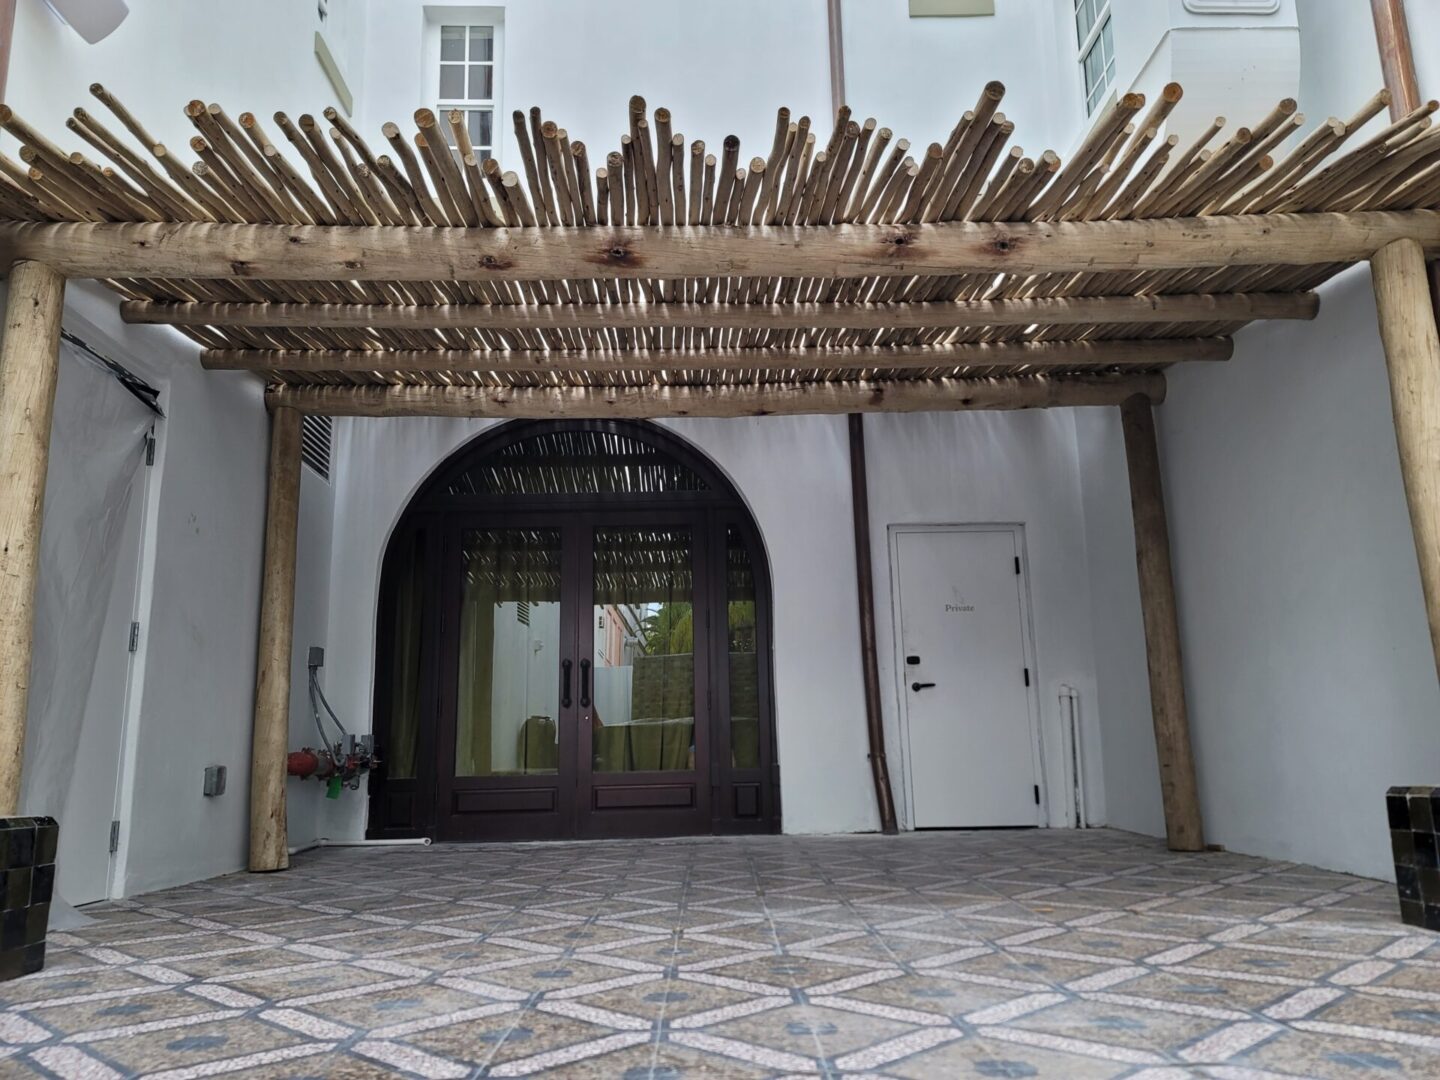 The entrance to a house with a wooden pergola.